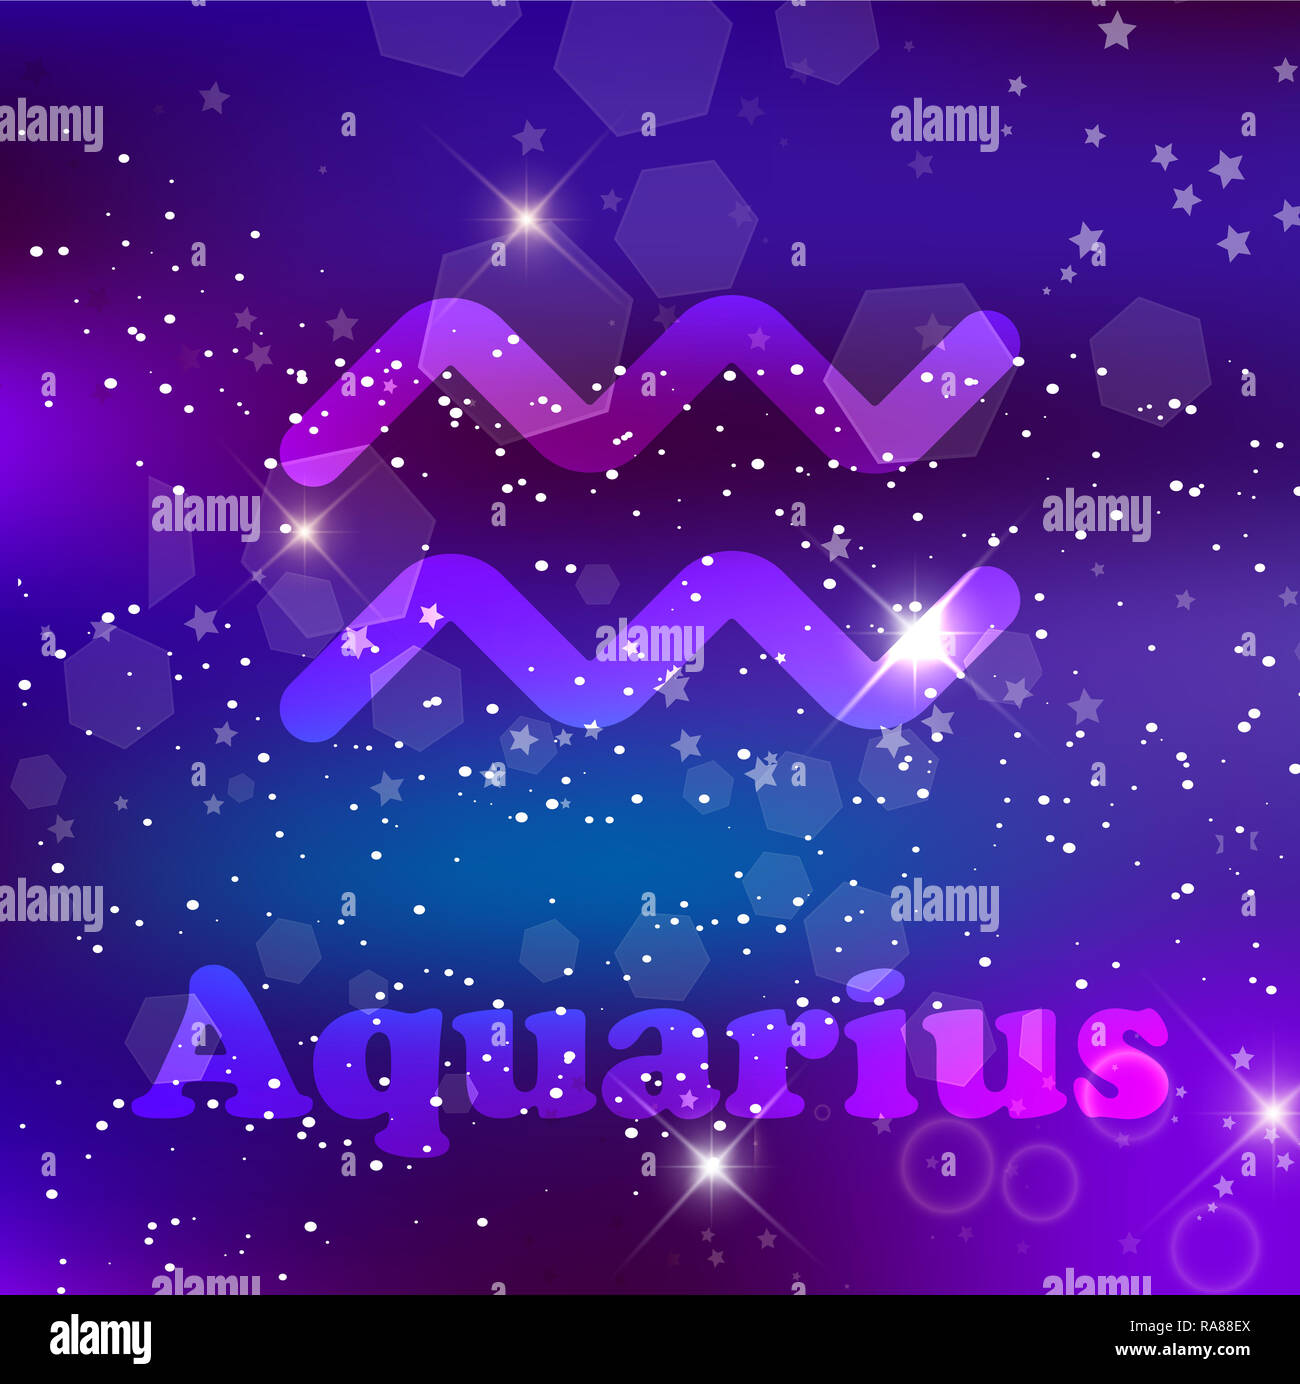 Aquarius Zodiac sign and constellation on a cosmic dark blue purple background with glowing stars and nebula.   illustration, banner, poster, card. Sp Stock Photo